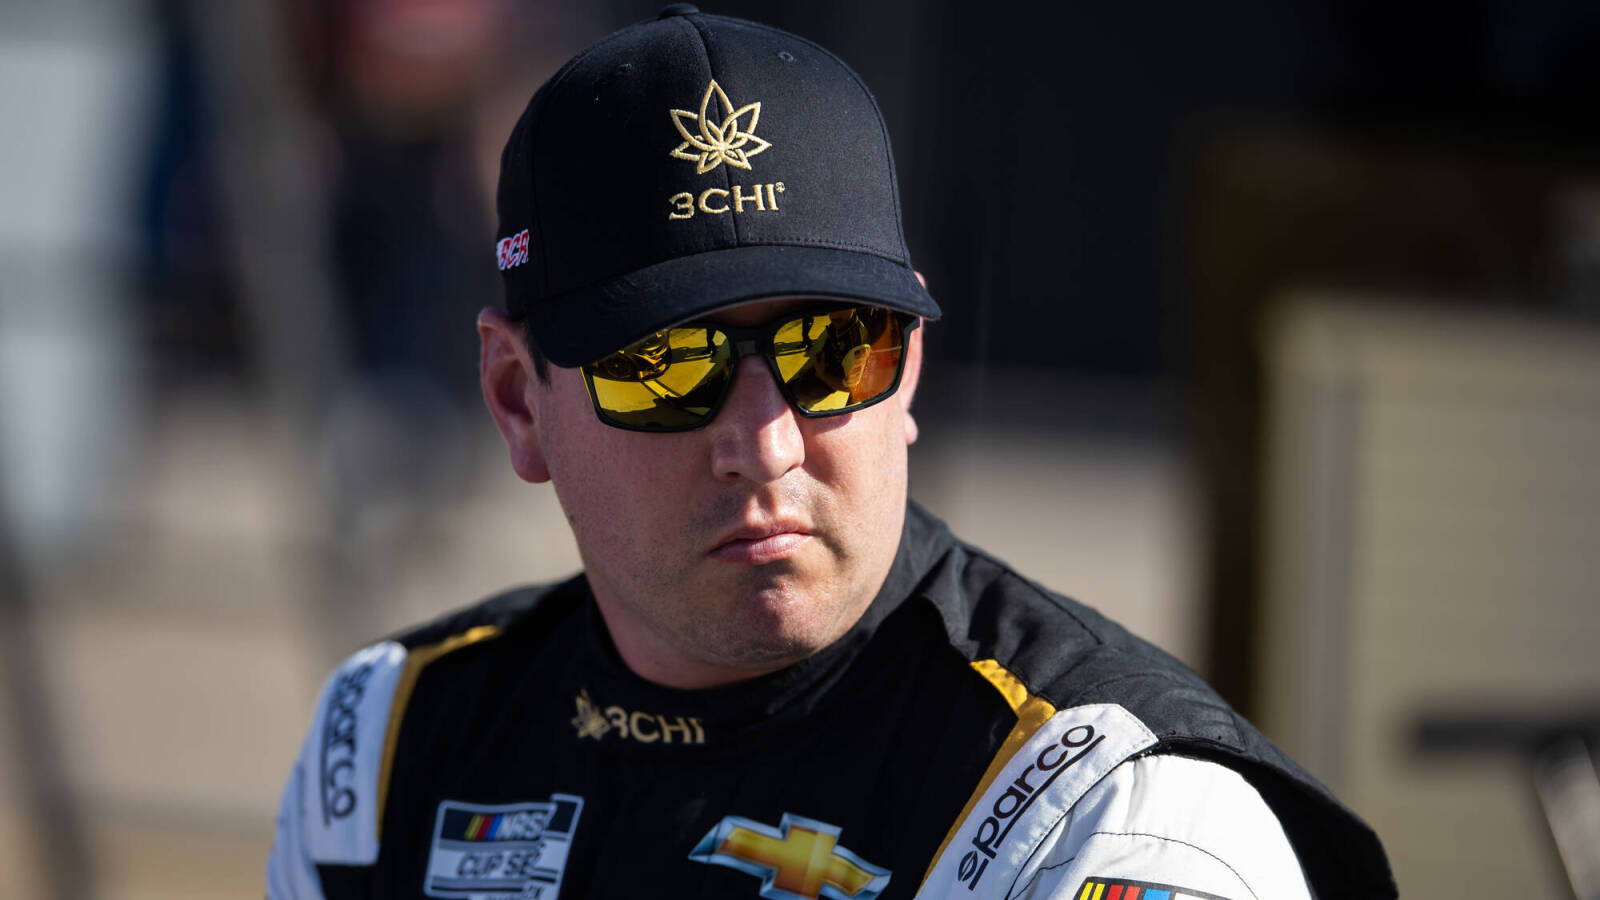 Why did $80 million worth NASCAR champion Kyle Busch cease operations of his energy drink company?